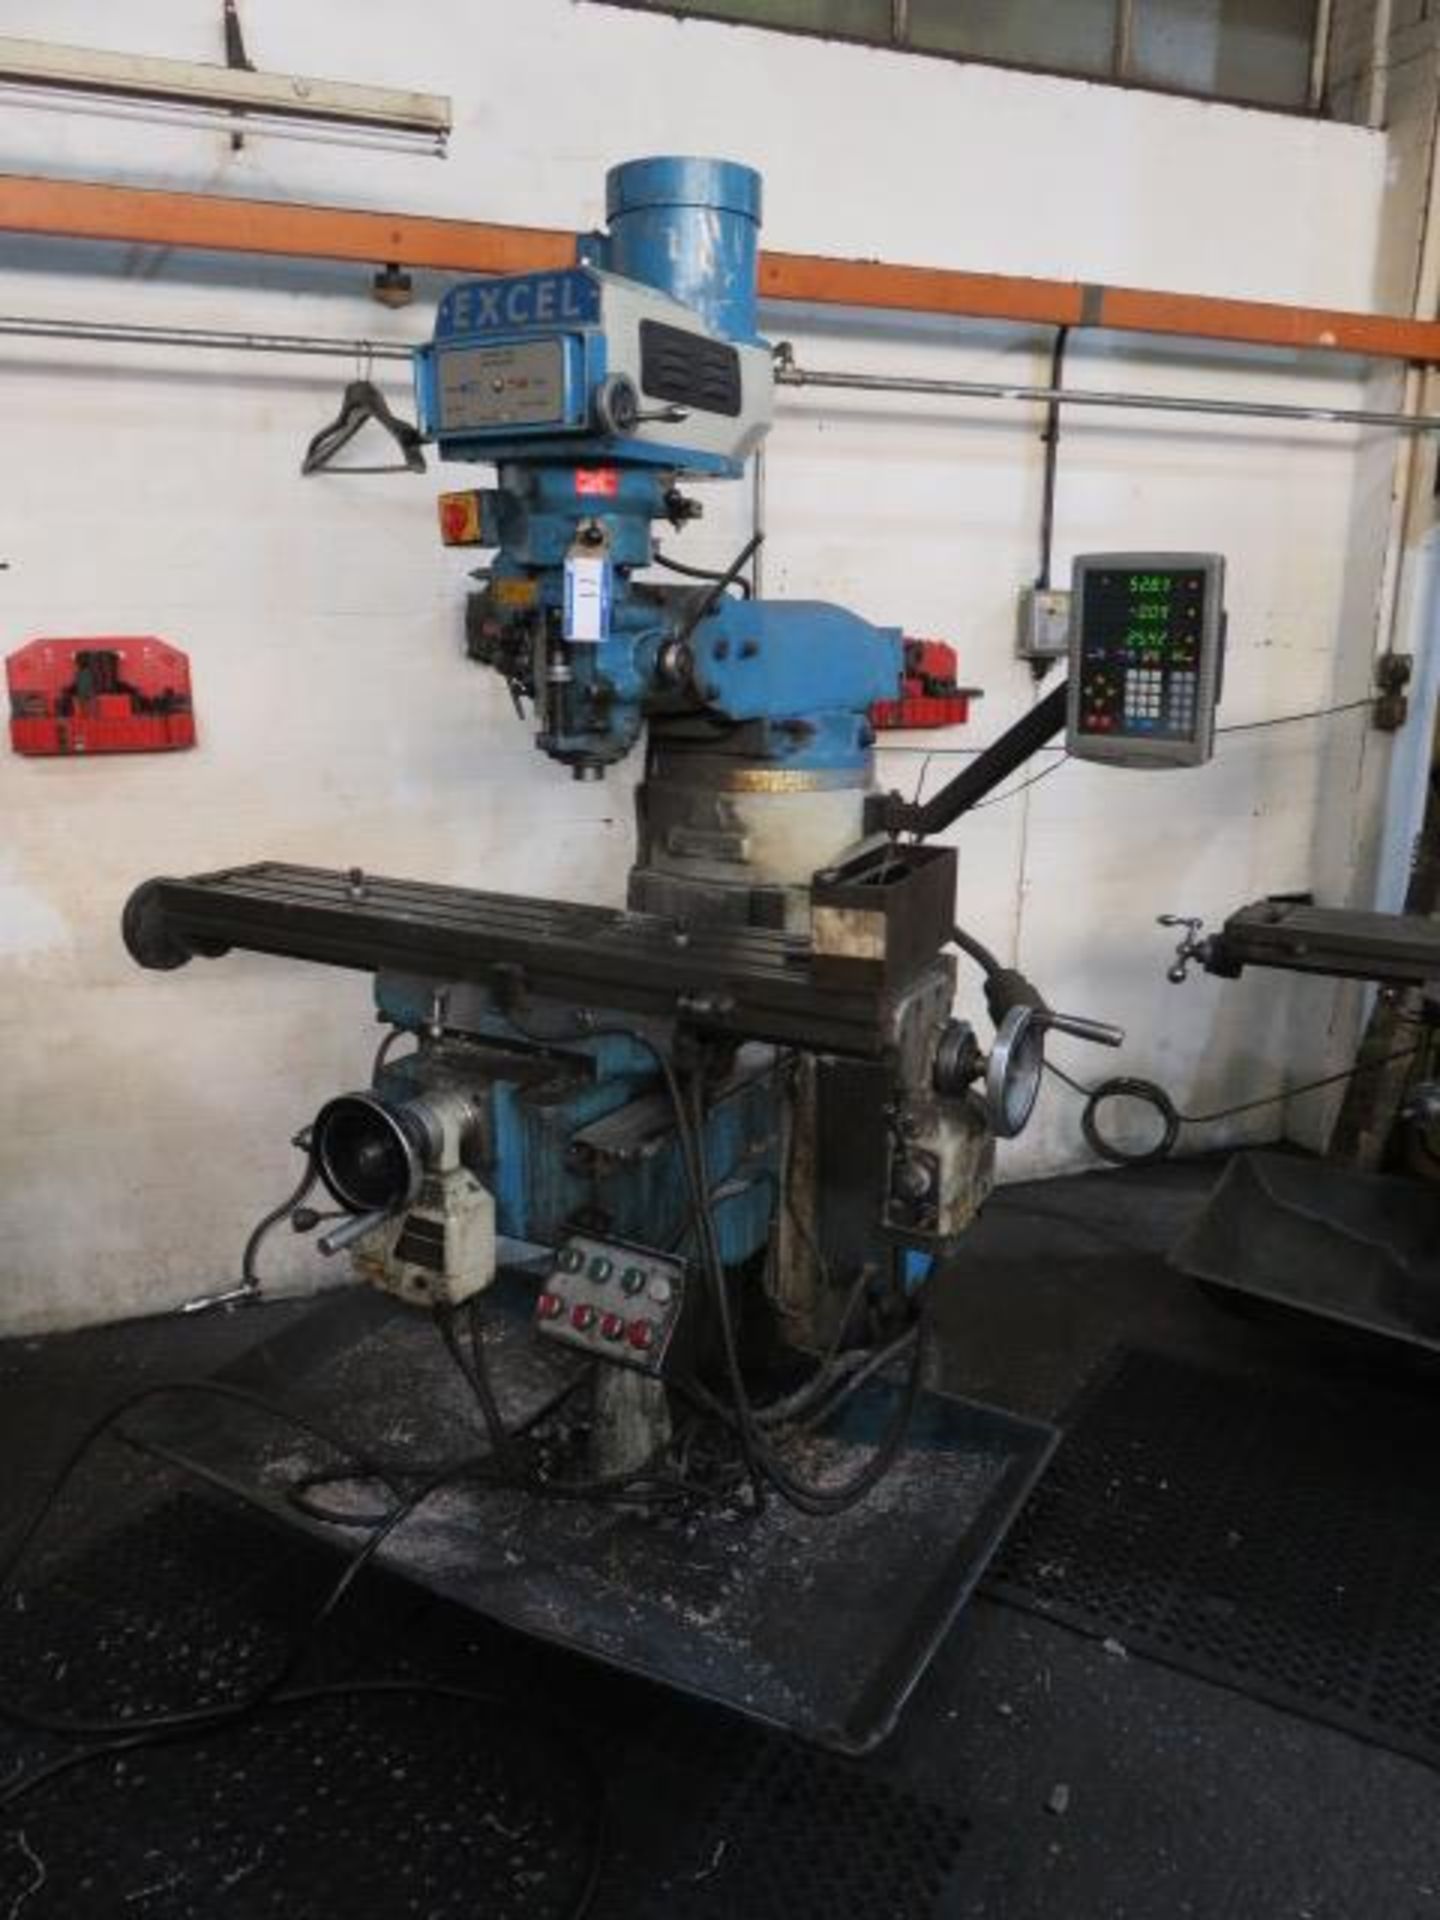 Excel RMTM2 Turret Milling Machine Complete With Newall Controls Serial No. 10583 (2004) (Full RAMS